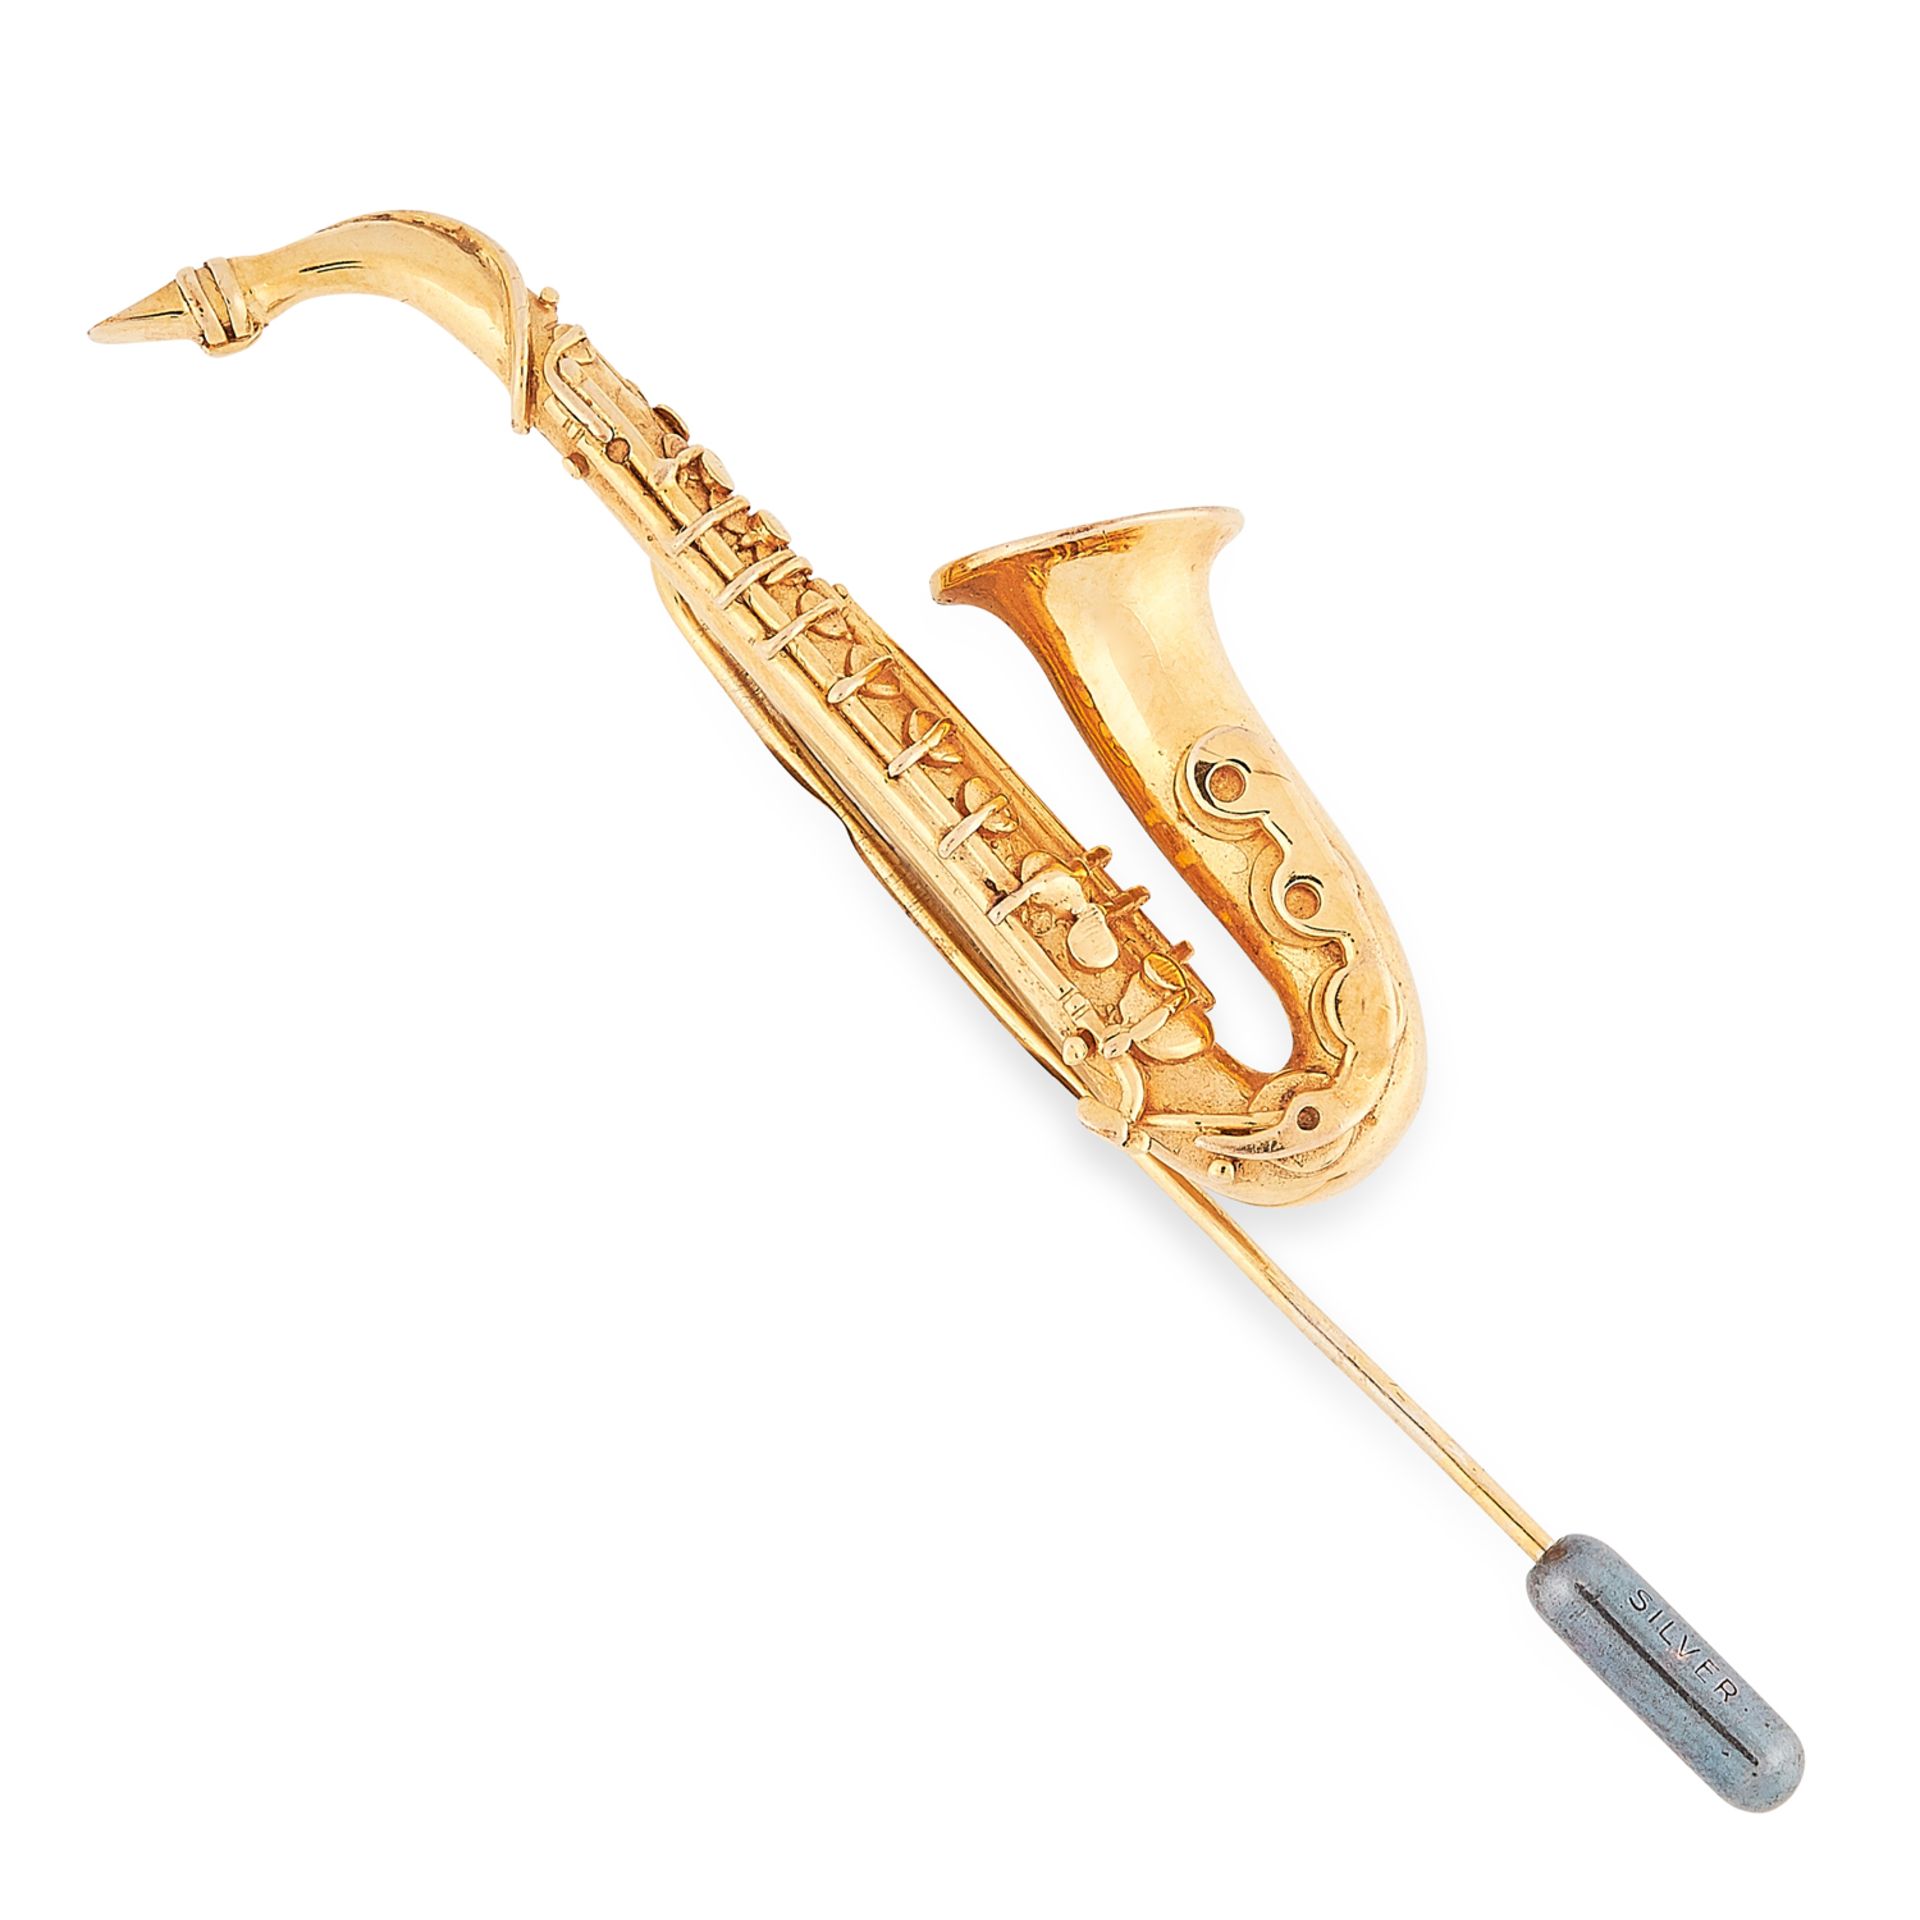 A SAXOPHONE PIN BROOCH in 9ct yellow gold, in the form of a saxophone, British hallmarks, 7cm / 2.